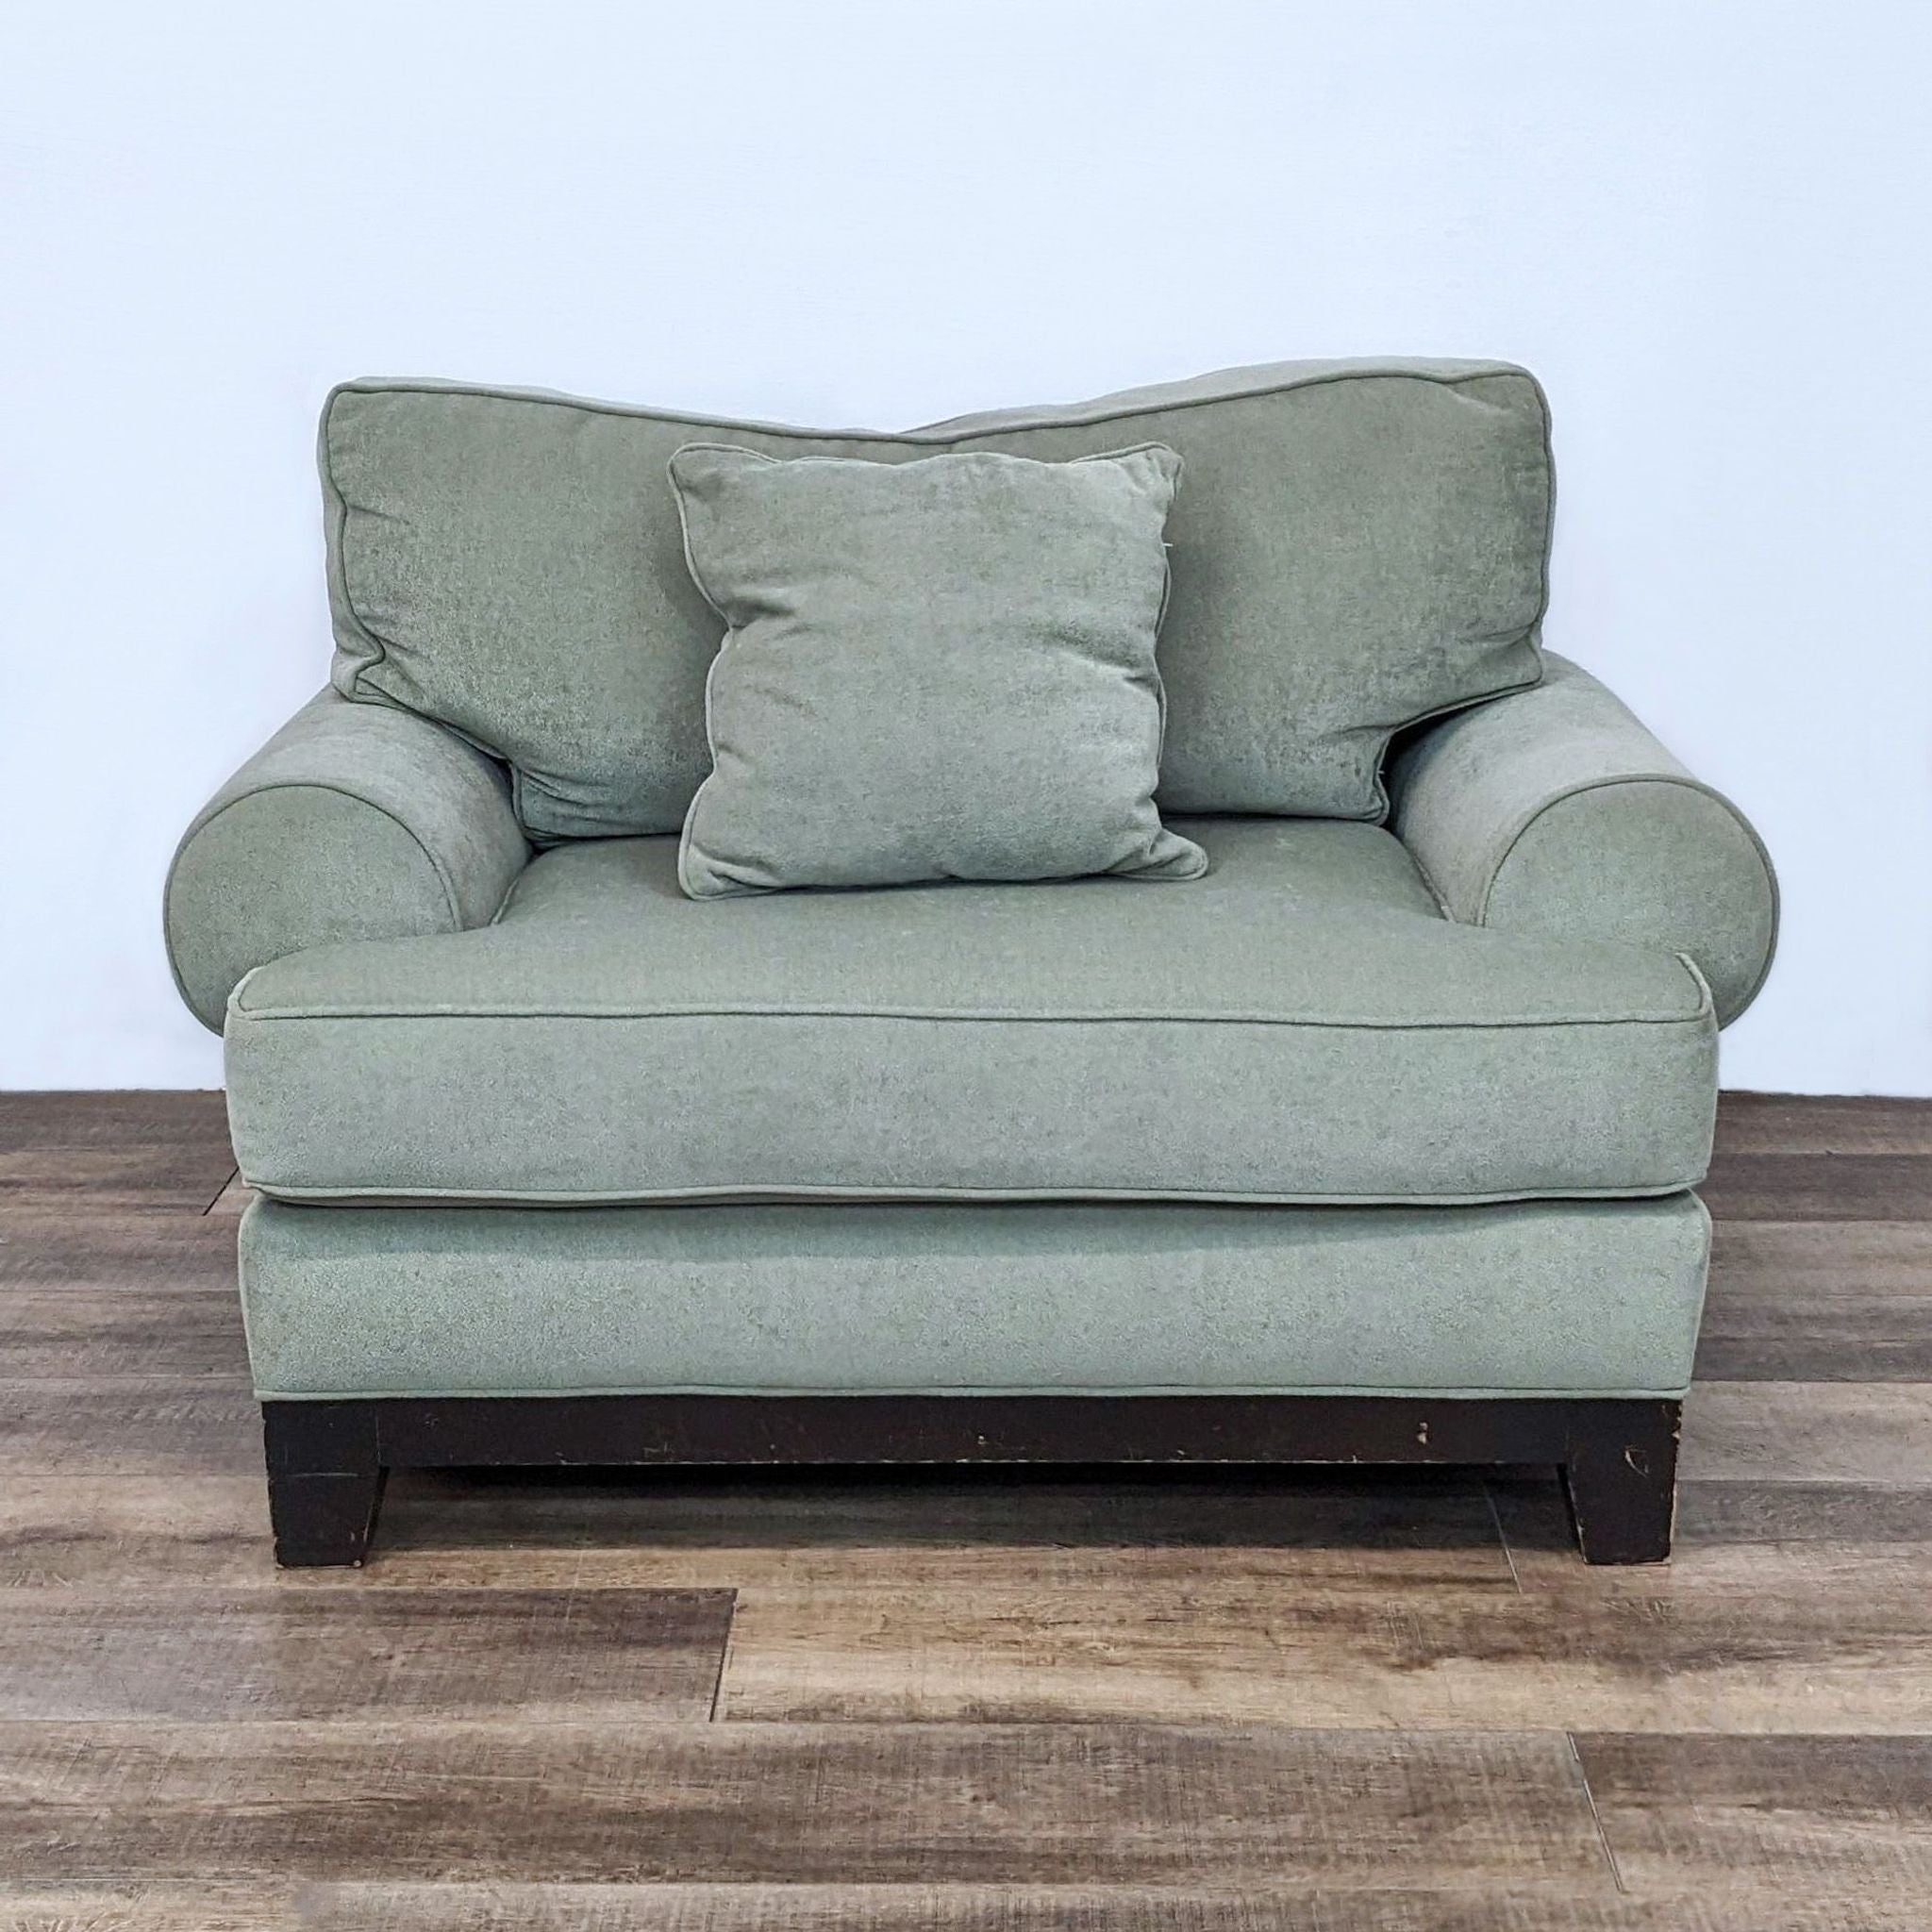 Alt text 2: Comfortable reading chair by Reperch with soft green upholstery and plush cushions, includes material tag detail.